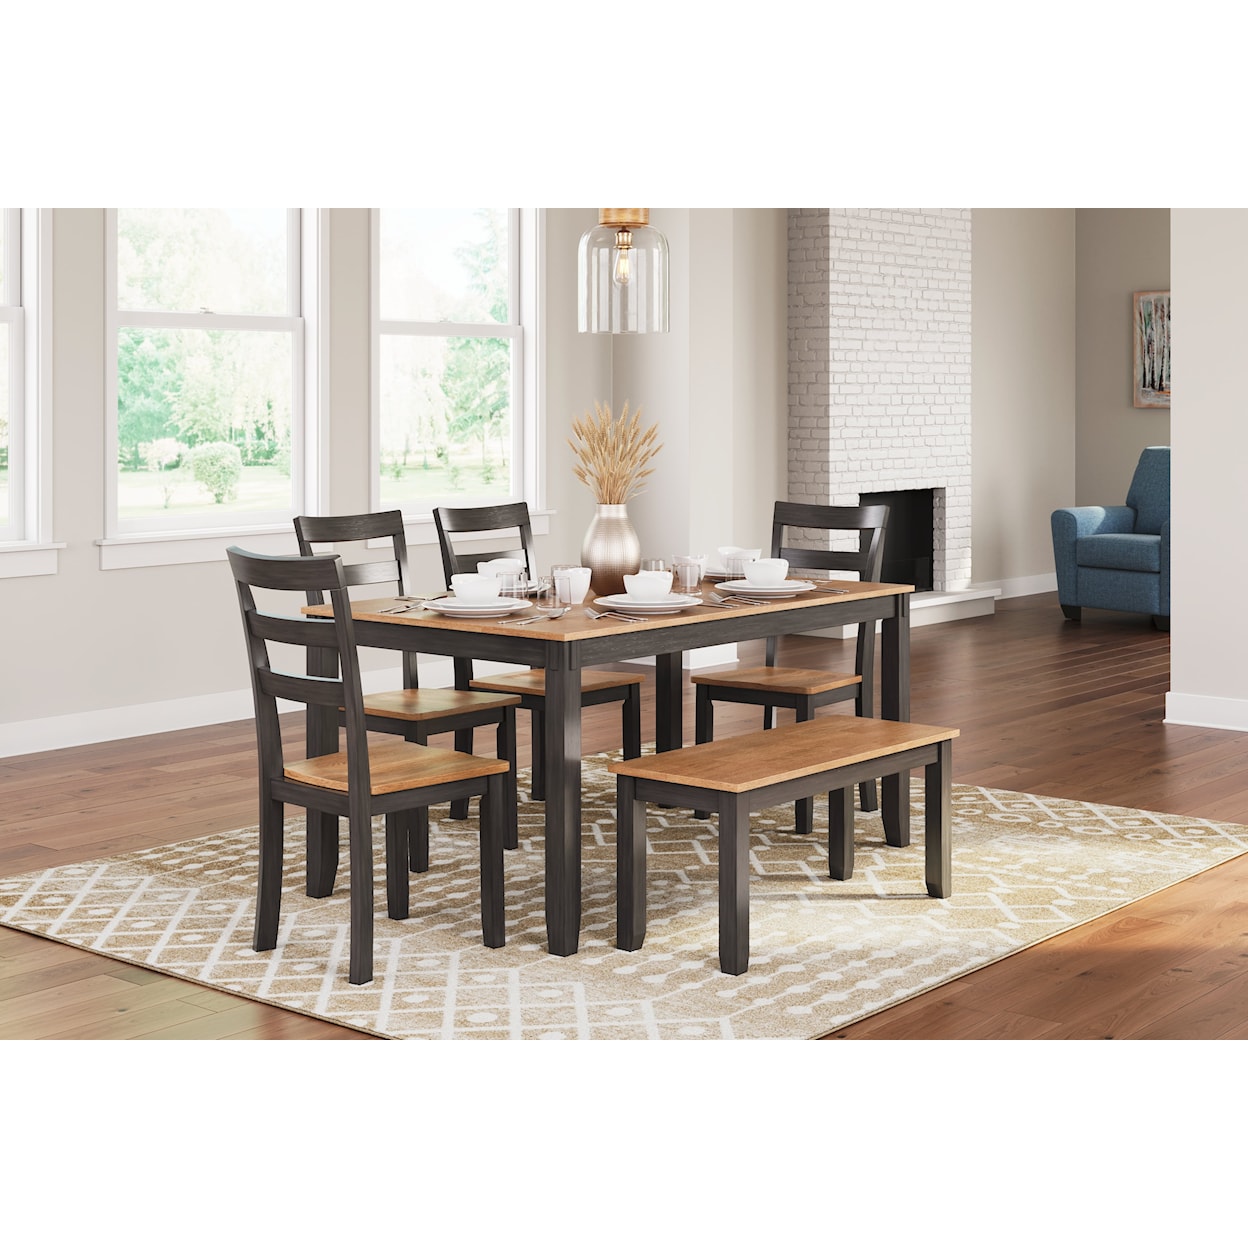 Signature Design Gesthaven Dining Room Table Set (6/Cn)